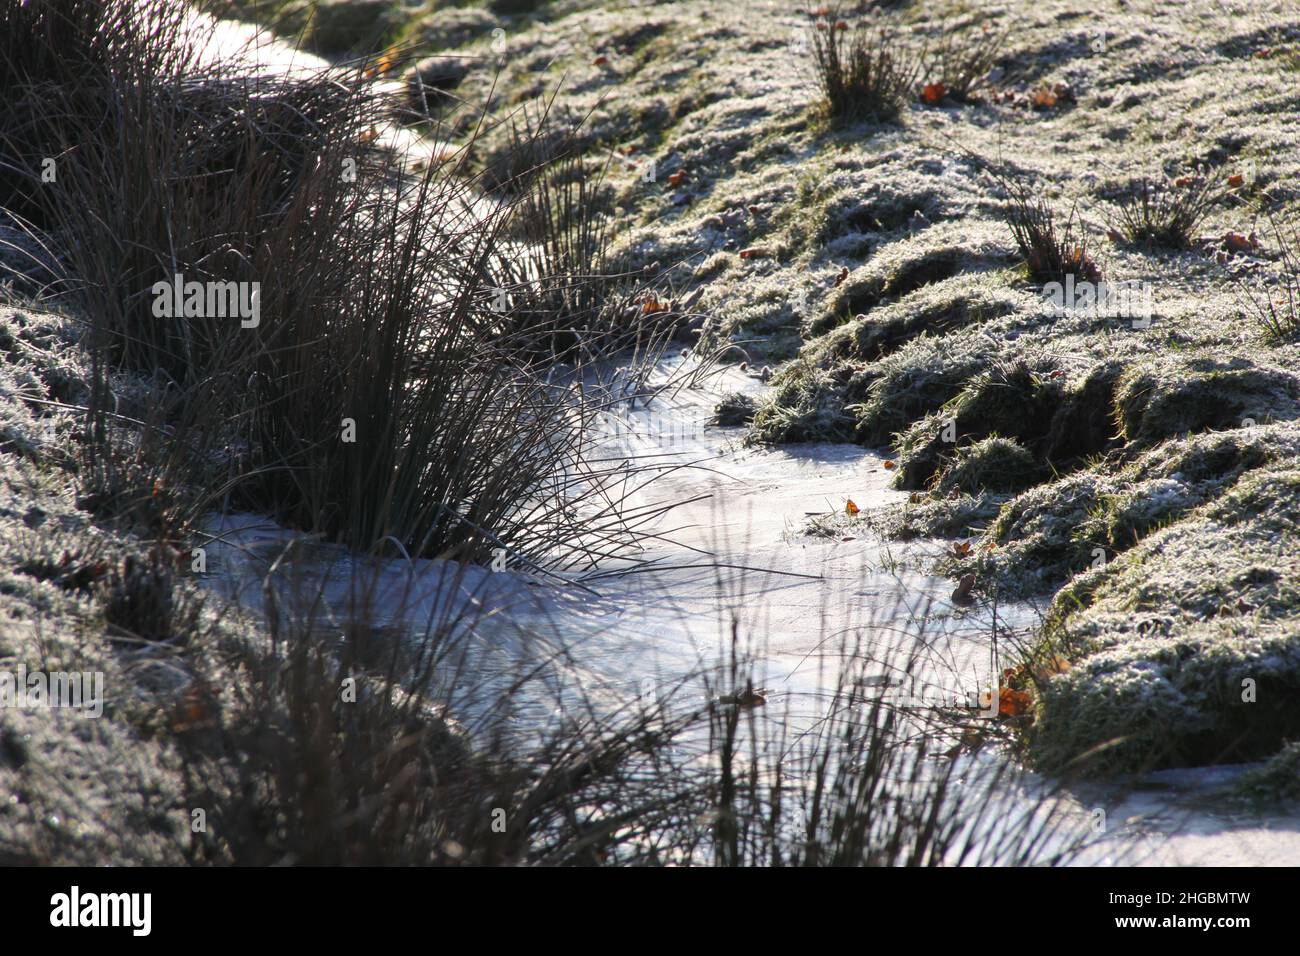 A wintry landscape with a snowy ditch and reed plants. Stock Photo